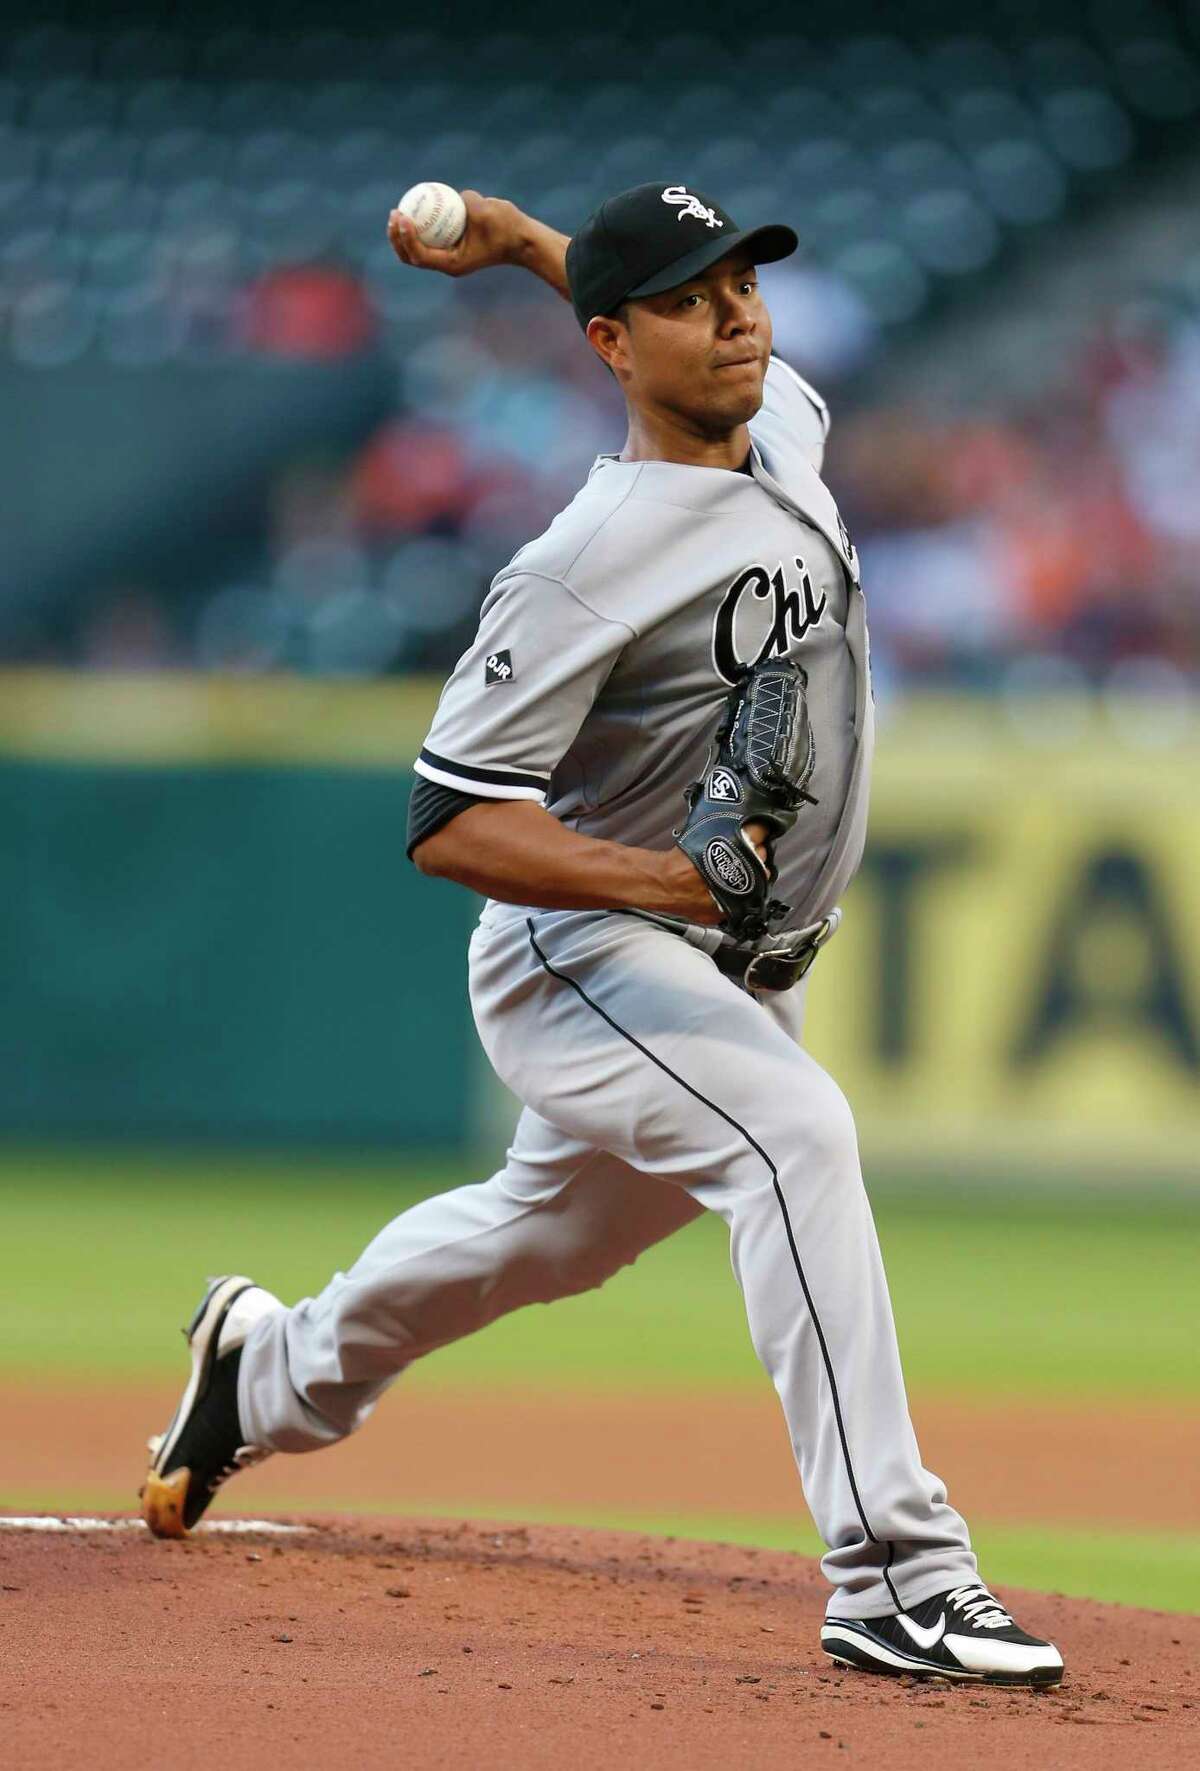 White Sox pitcher Jose Quintana, whose contract includes team options through 2020, has been discussed as a possible trade target for the Astros dating to last offseason.